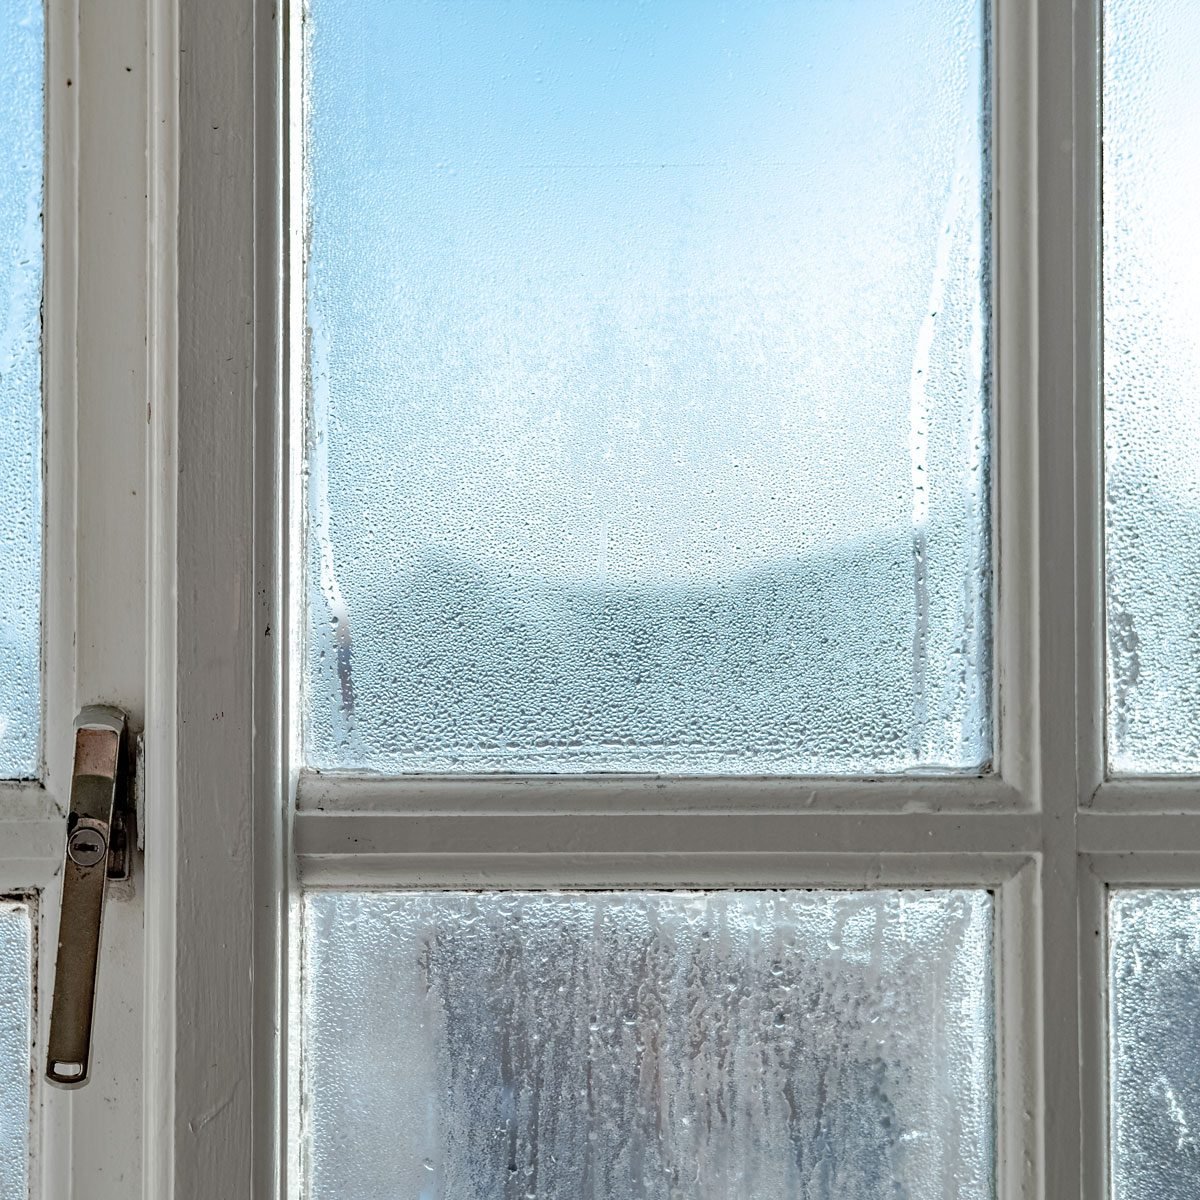 How to Avoid and Remove Window Condensation